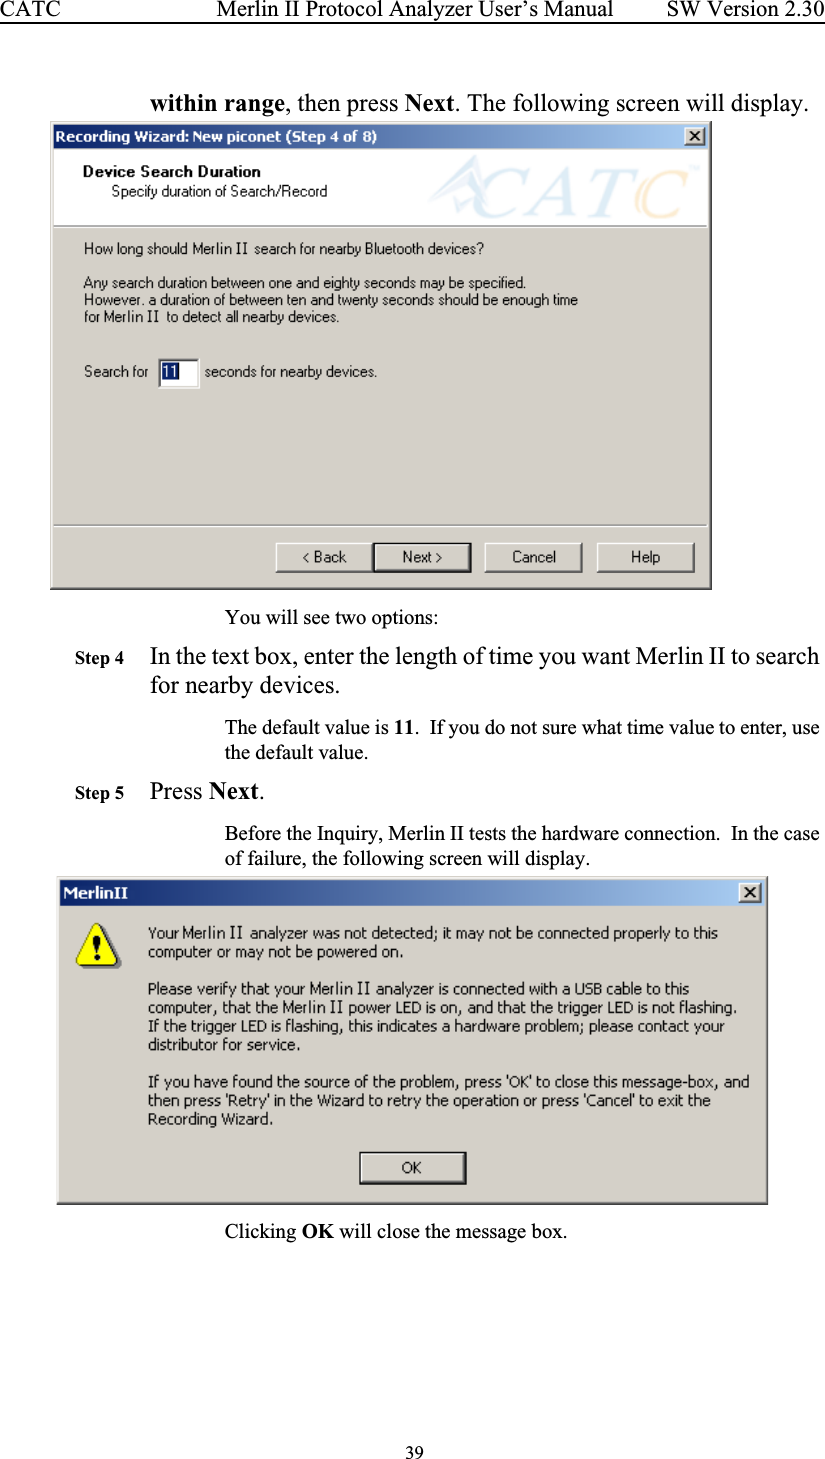  39 Merlin II Protocol Analyzer User’s ManualCATC SW Version 2.30within range, then press Next. The following screen will display.You will see two options:Step 4 In the text box, enter the length of time you want Merlin II to search for nearby devices.The default value is 11.  If you do not sure what time value to enter, use the default value.Step 5 Press Next.Before the Inquiry, Merlin II tests the hardware connection.  In the case of failure, the following screen will display.  Clicking OK will close the message box.